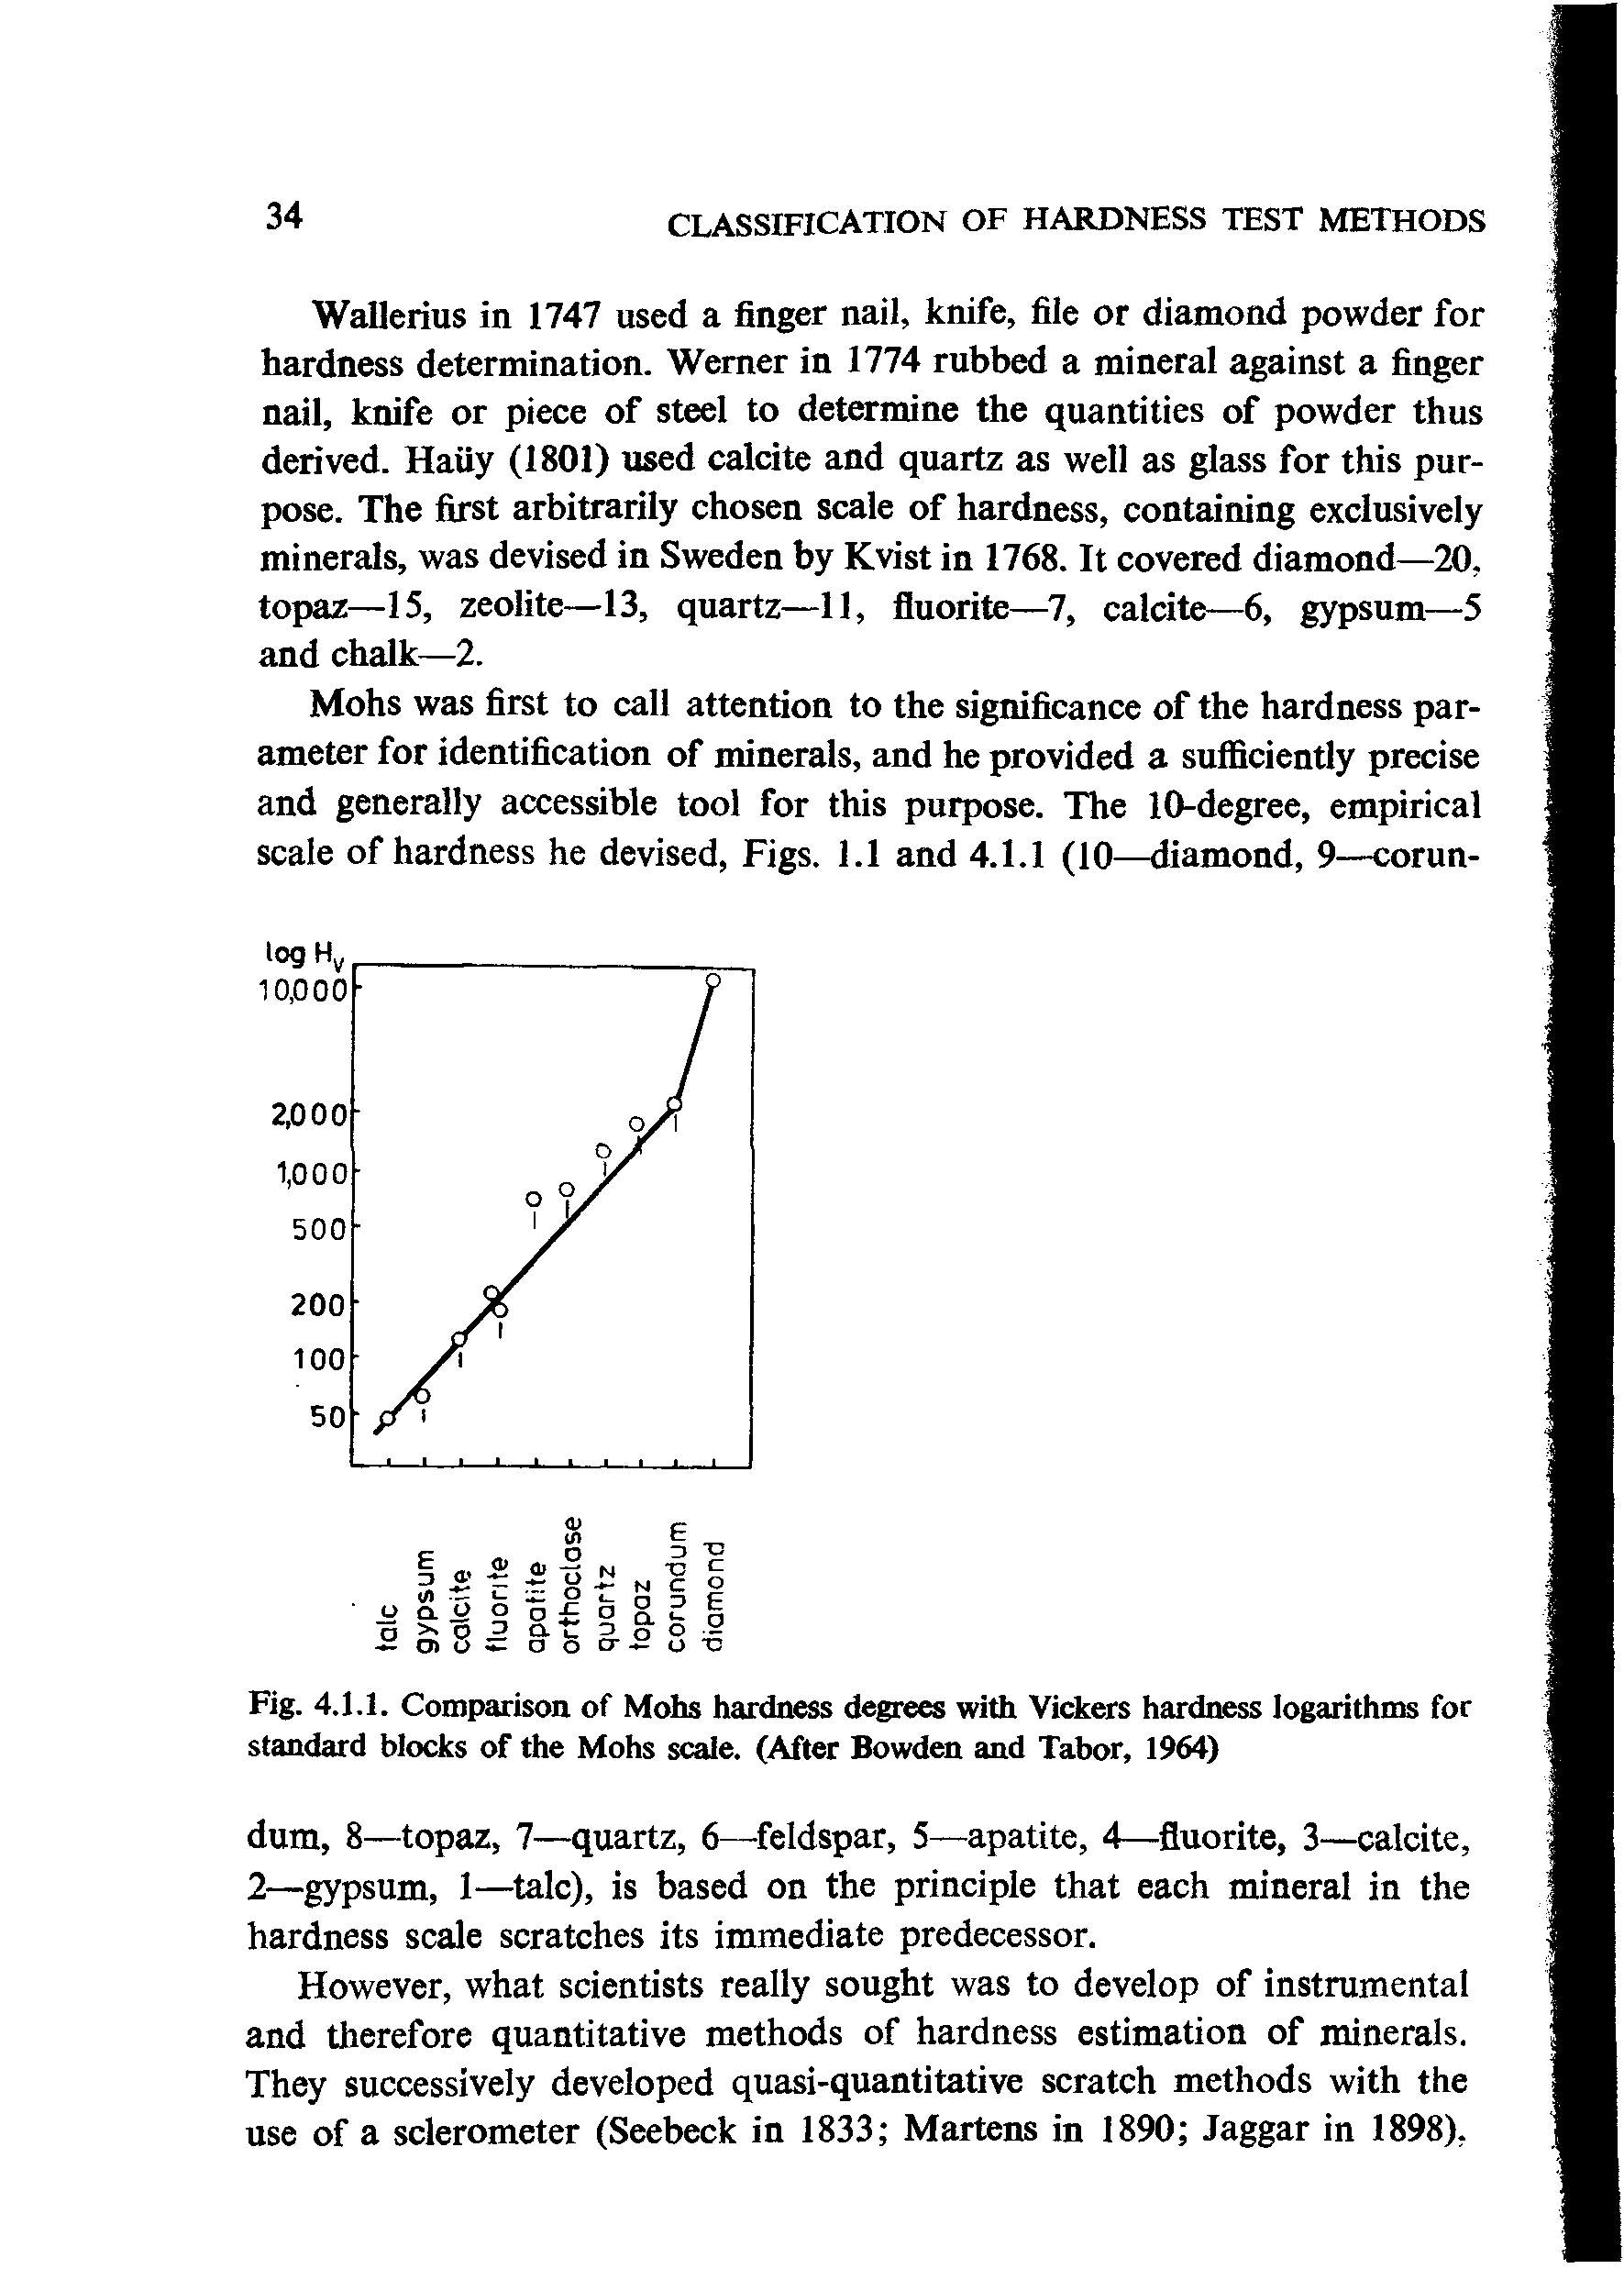 Fig. 4.1.1. Comparison of Mohs hardness degrees with Vickers hardness logarithms for standard blocks of the Mohs scale. (After Bowden and Tabor, 1964)...